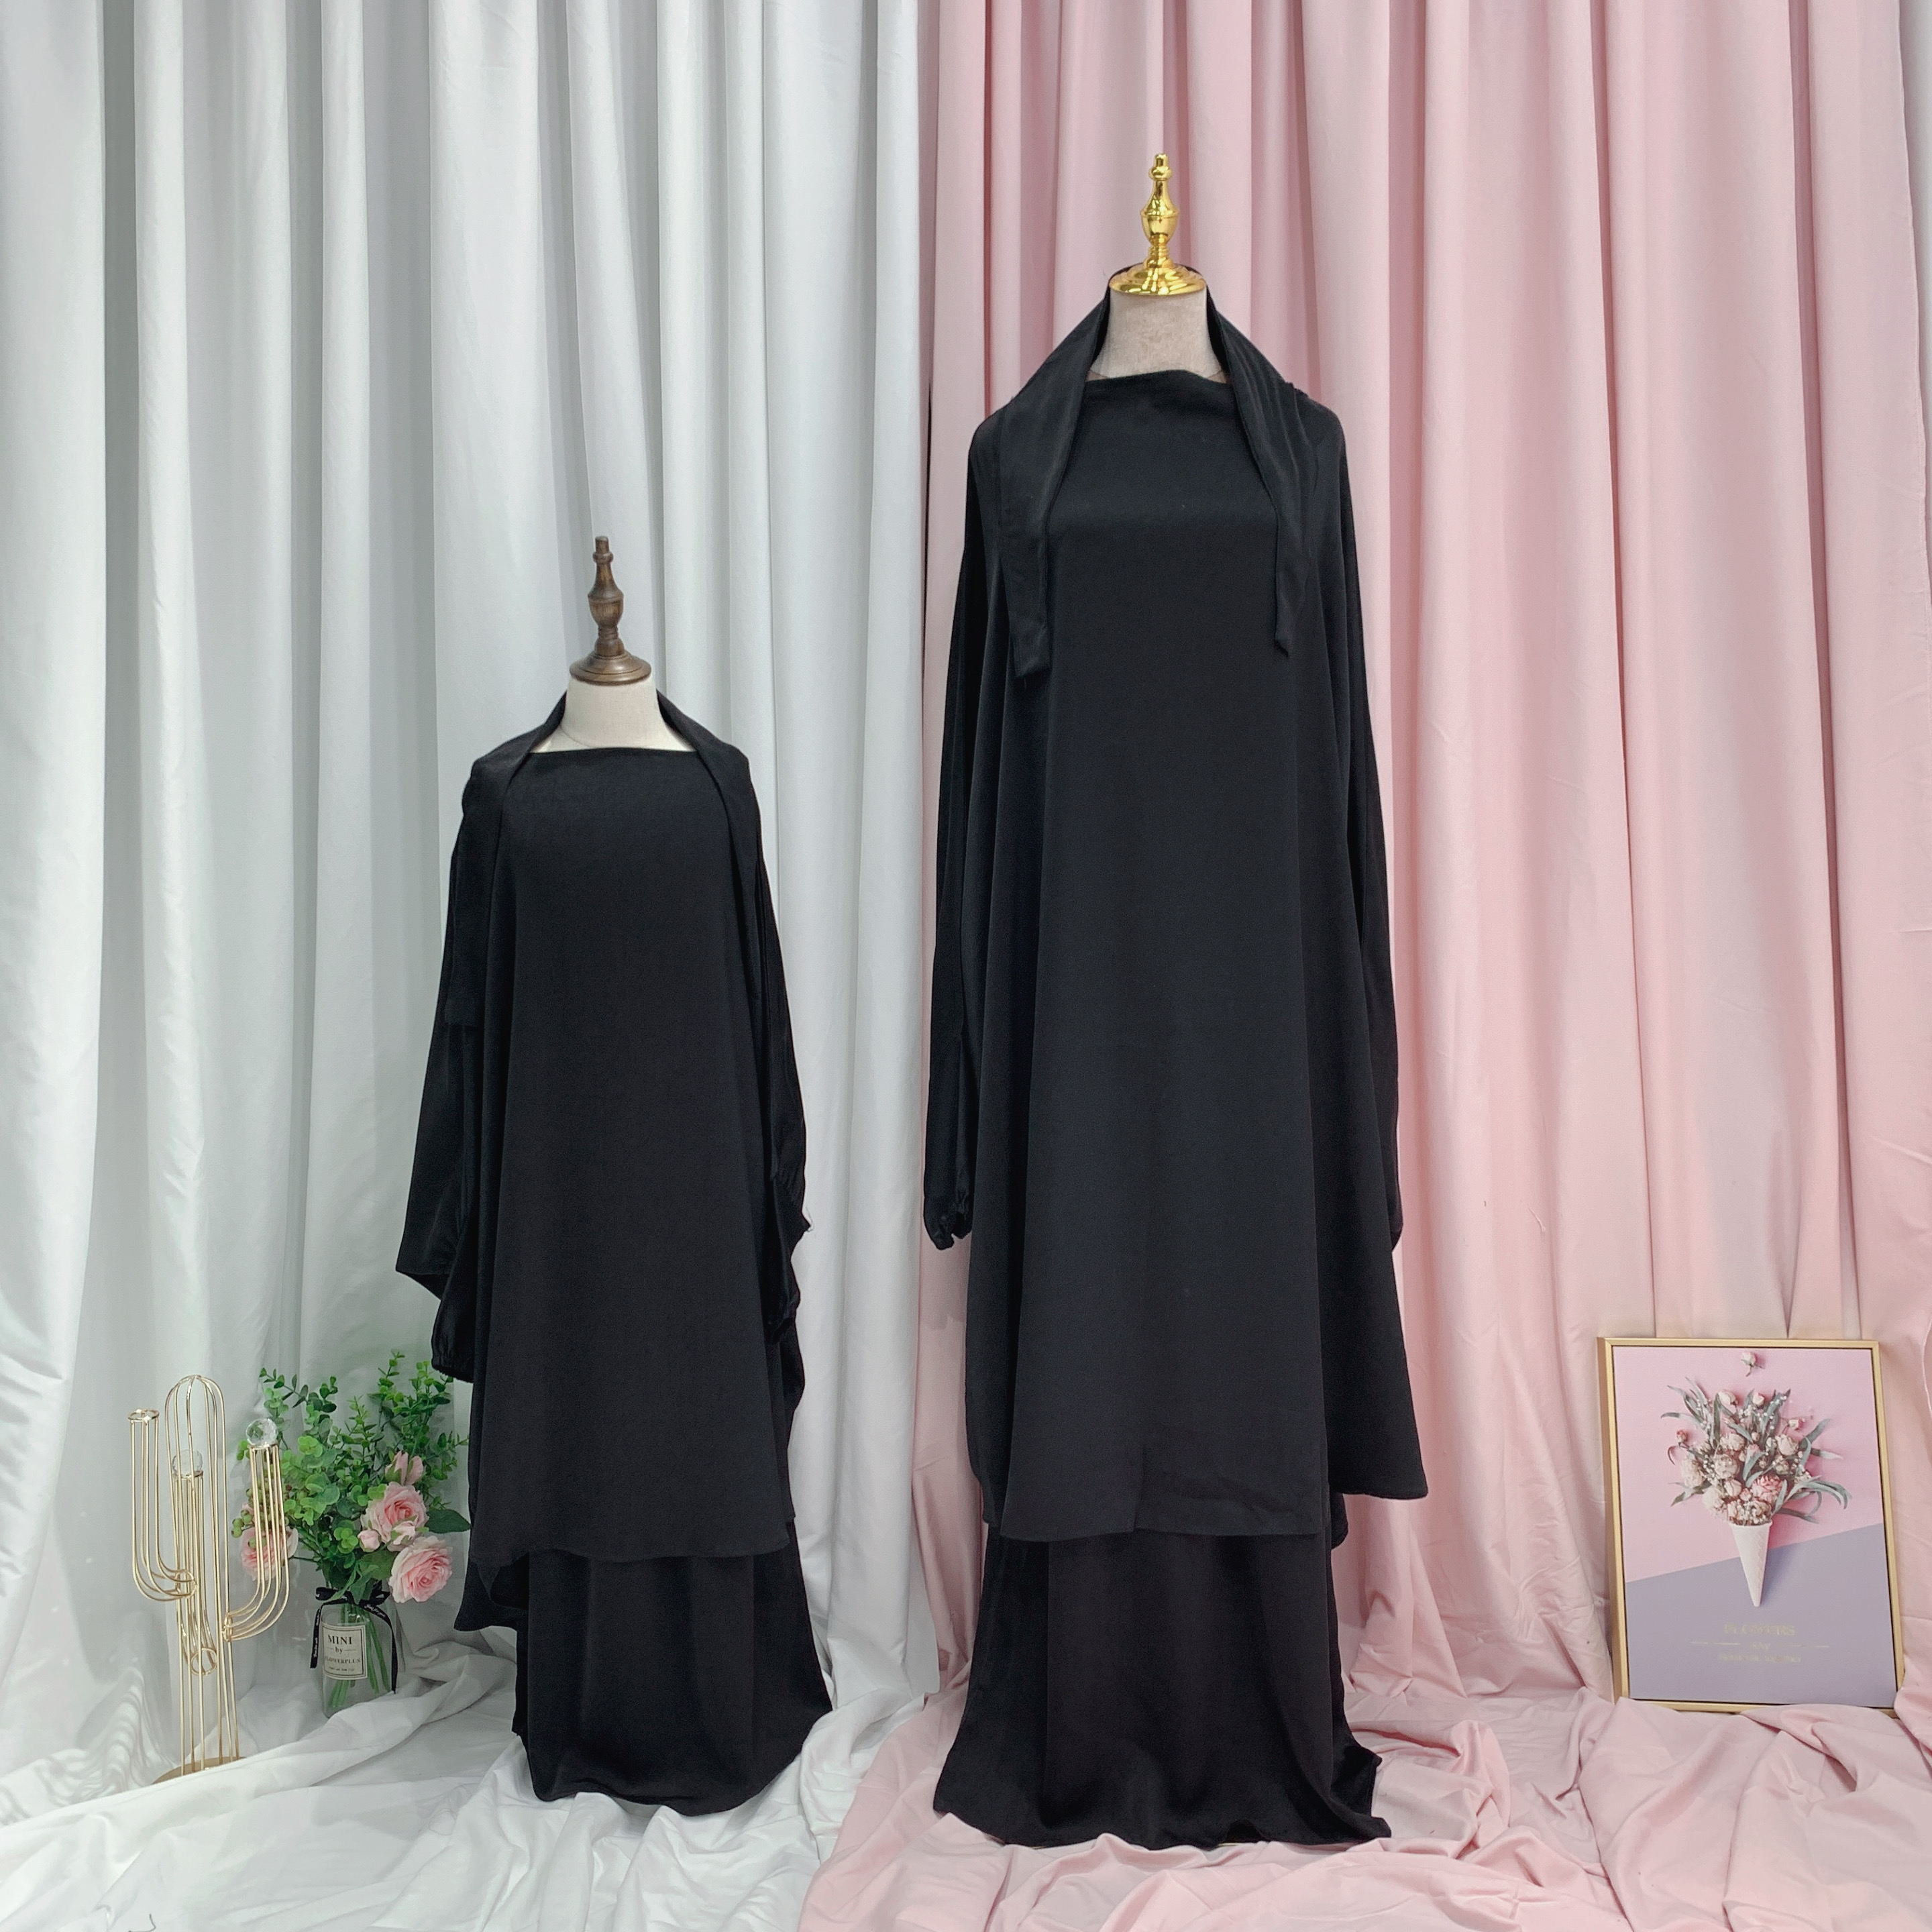 2022 Wholesale Parent Child Outfit Jilbab Abaya Two Pieces Abaya Set Mommy And Daughter Ethnic Clothing